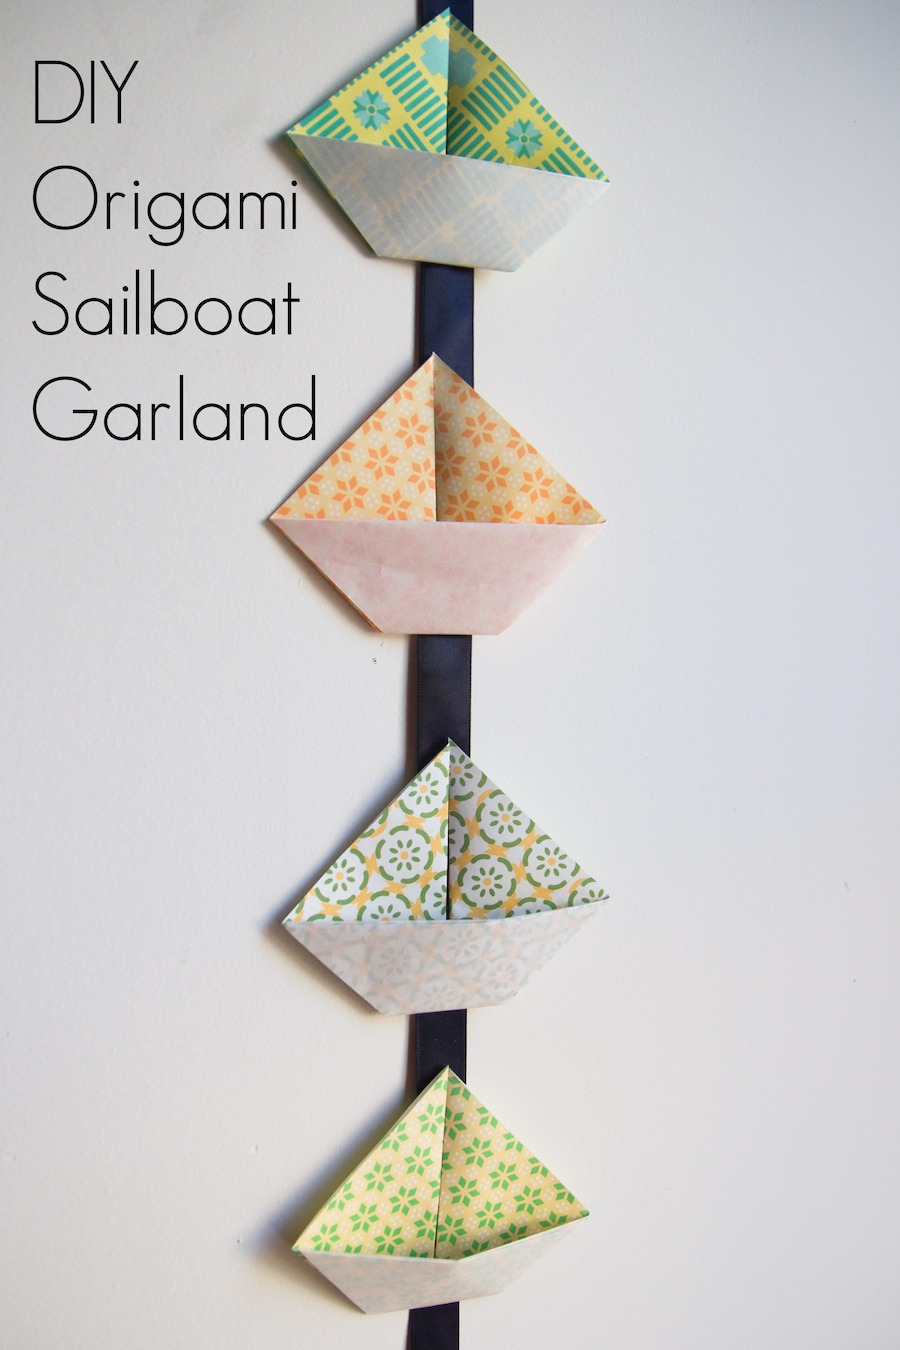 How To Make A Origami Sailboat Diy Origami Sailboat Garland You Can Make With Your Kids